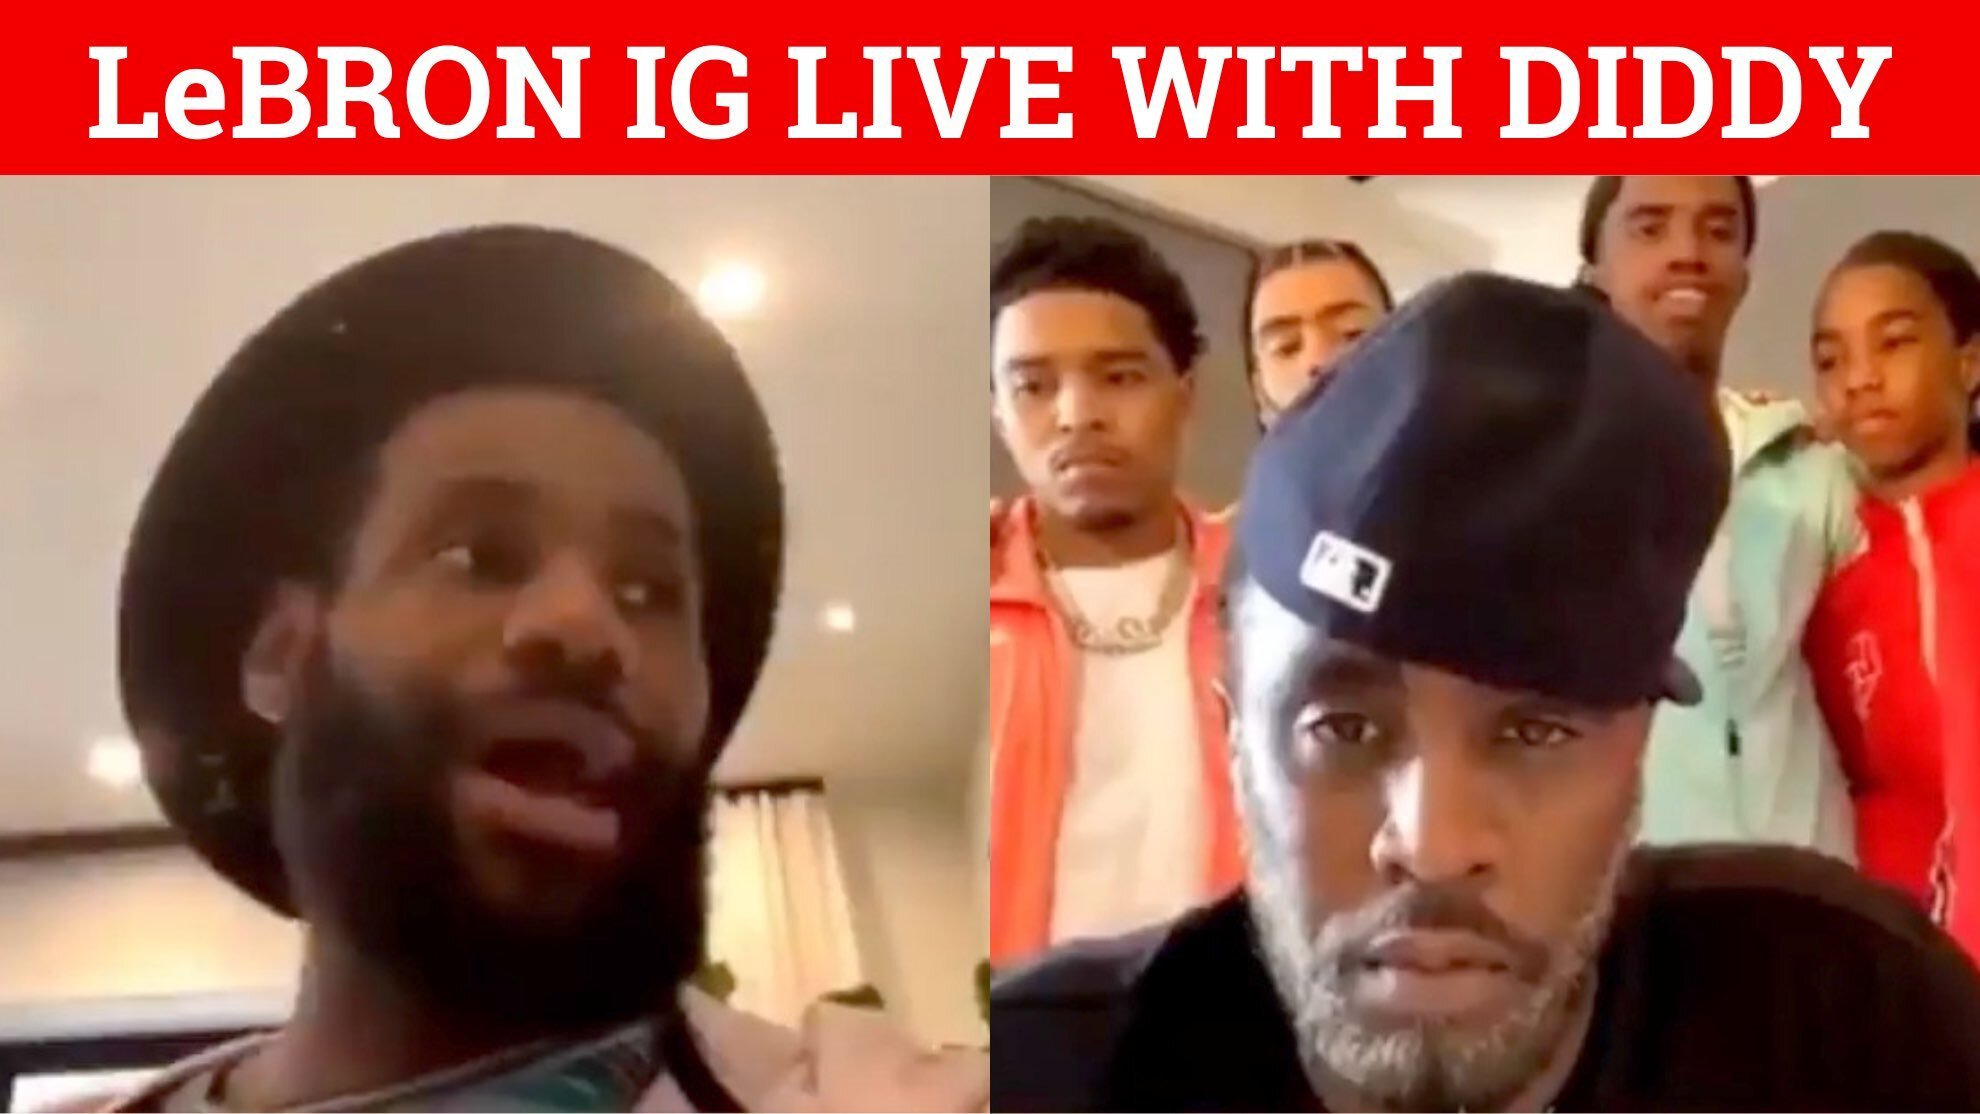 LeBron James controversial remark on Instagram live with Diddy comes to light